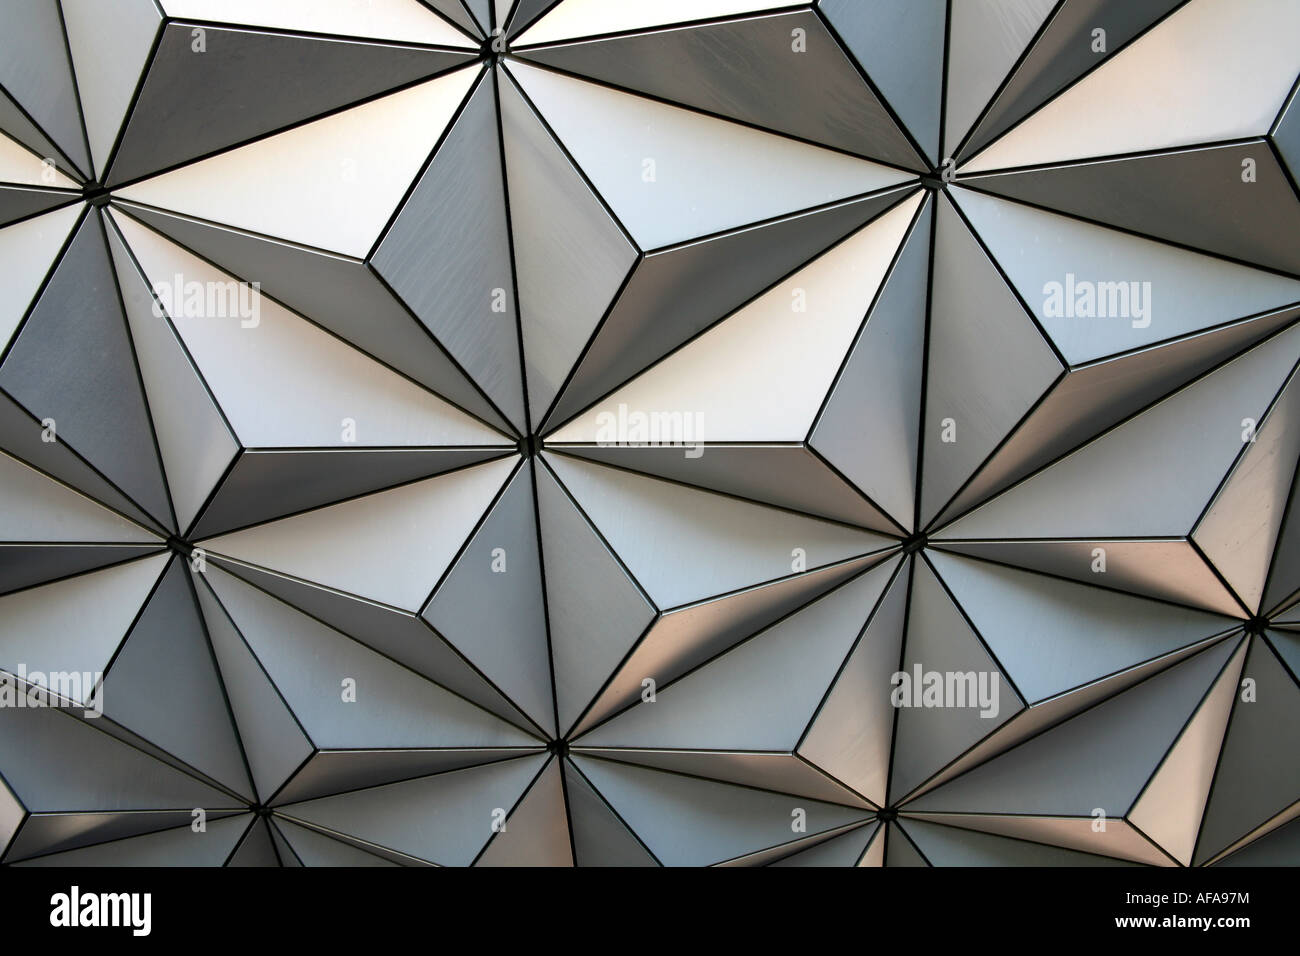 Geometric patterns on the surface of a geosphere showing lines, triangles, pyramids and other shapes. Stock Photo